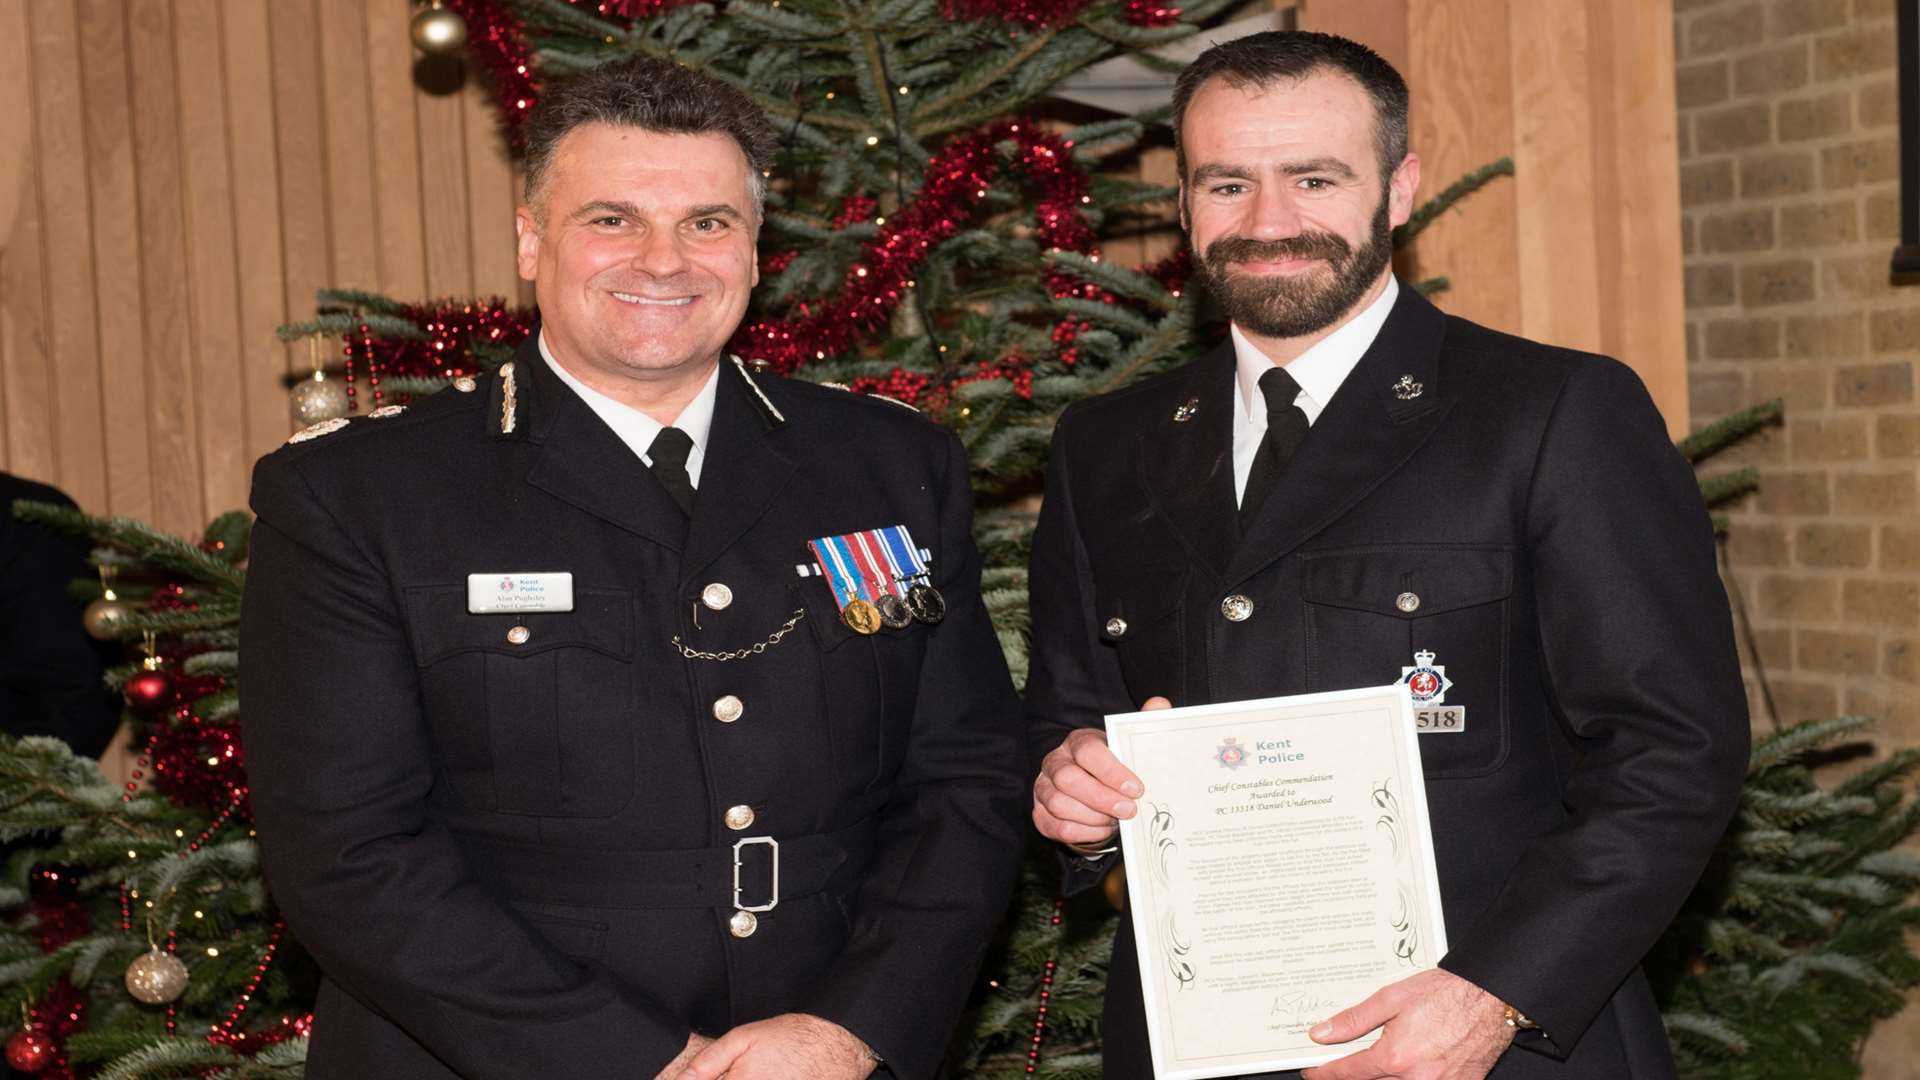 PC Daniel Underwood is awarded for his bravery by Chief Constable Alan Pughsley.